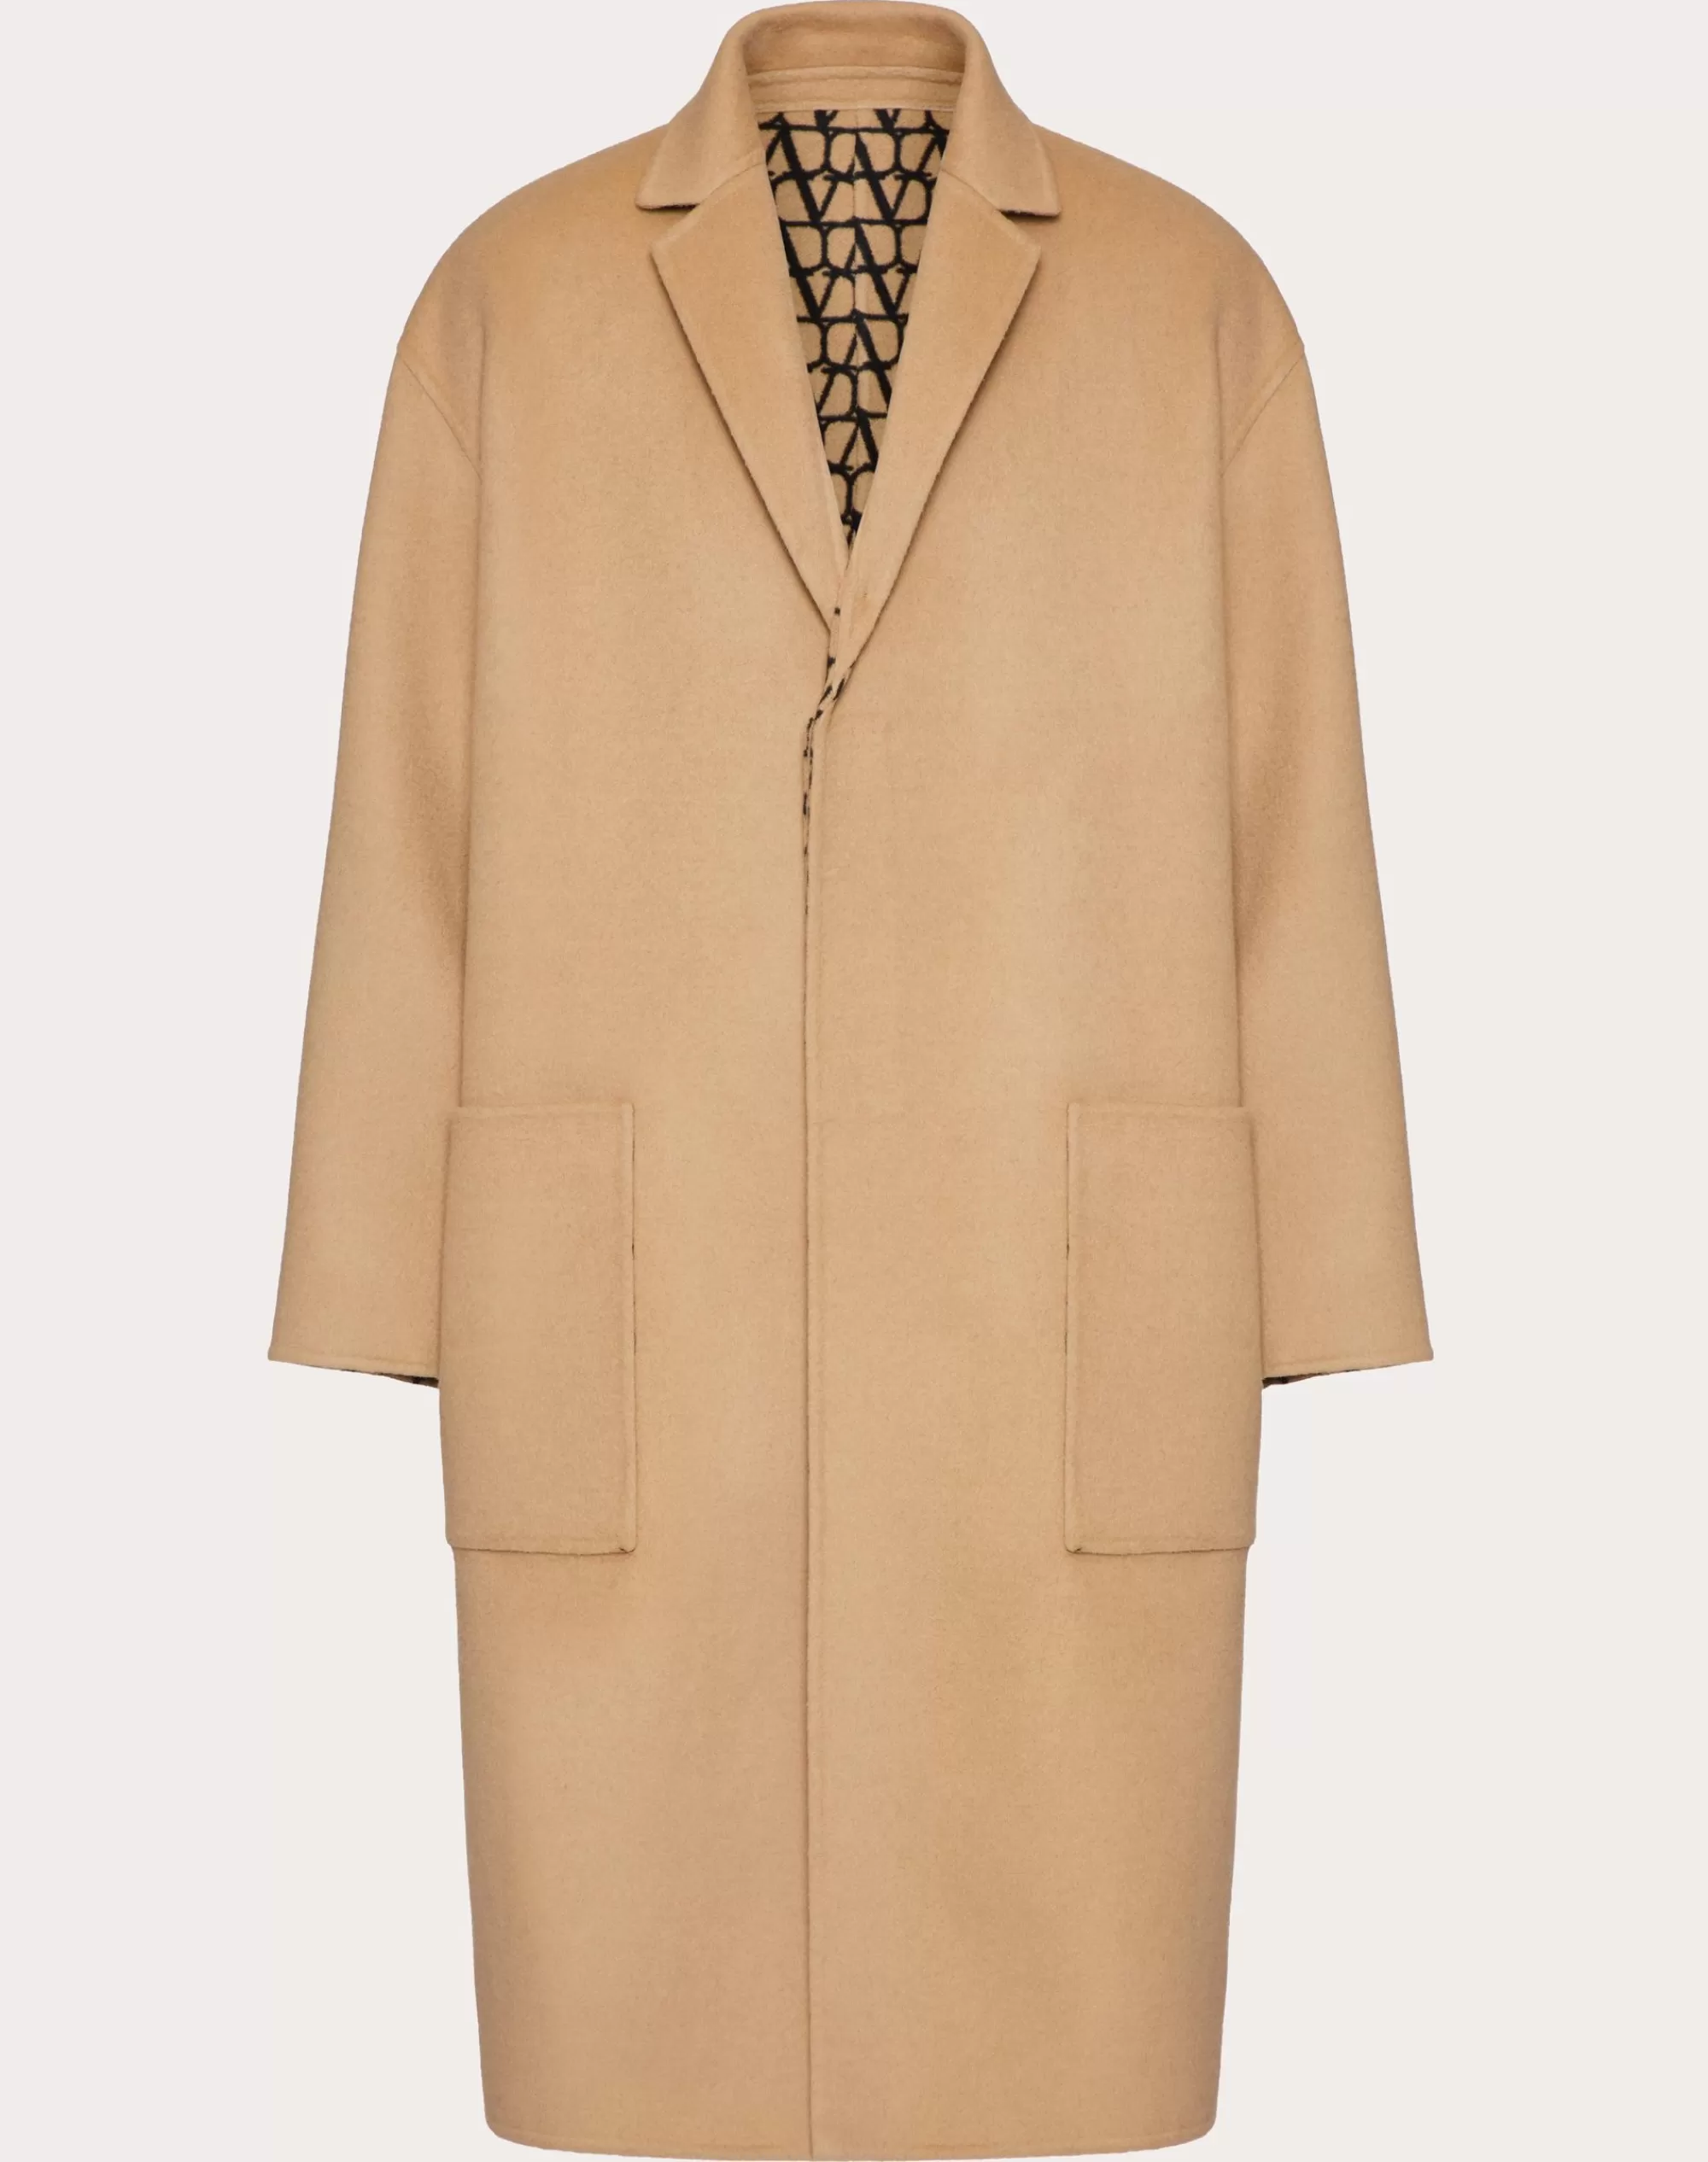 Valentino REVERSIBLE DOUBLE-FACED WOOL COAT WITH TOILE ICONOGRAPHE PATTERN Camel Cheap